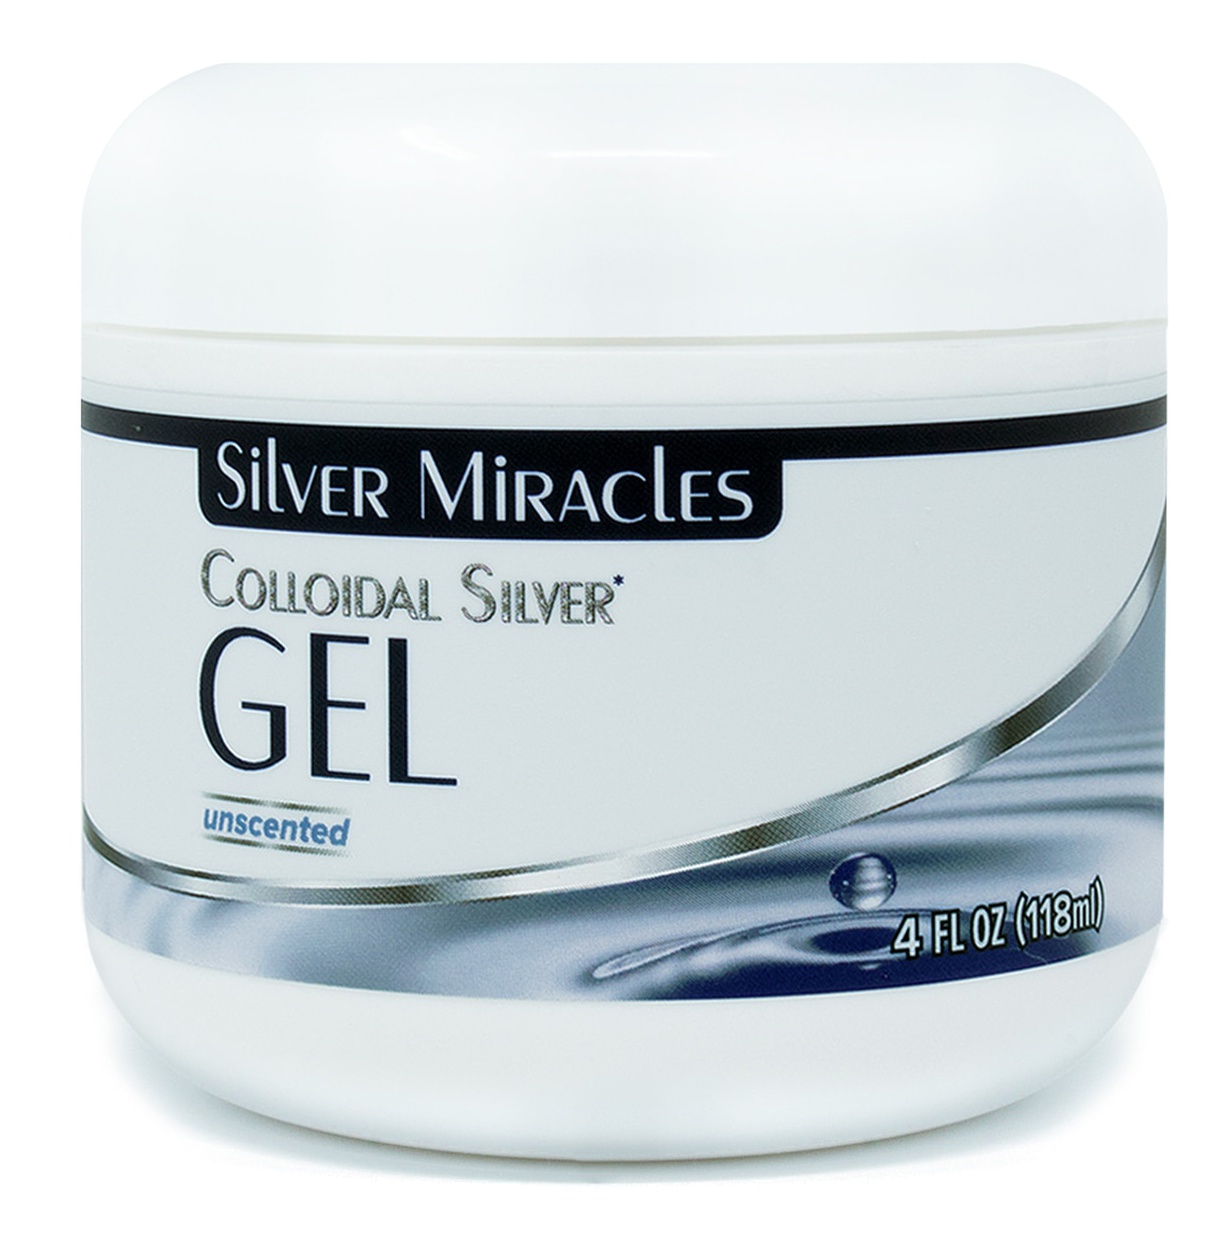 Silver Miracles Colloidal Silver Gel